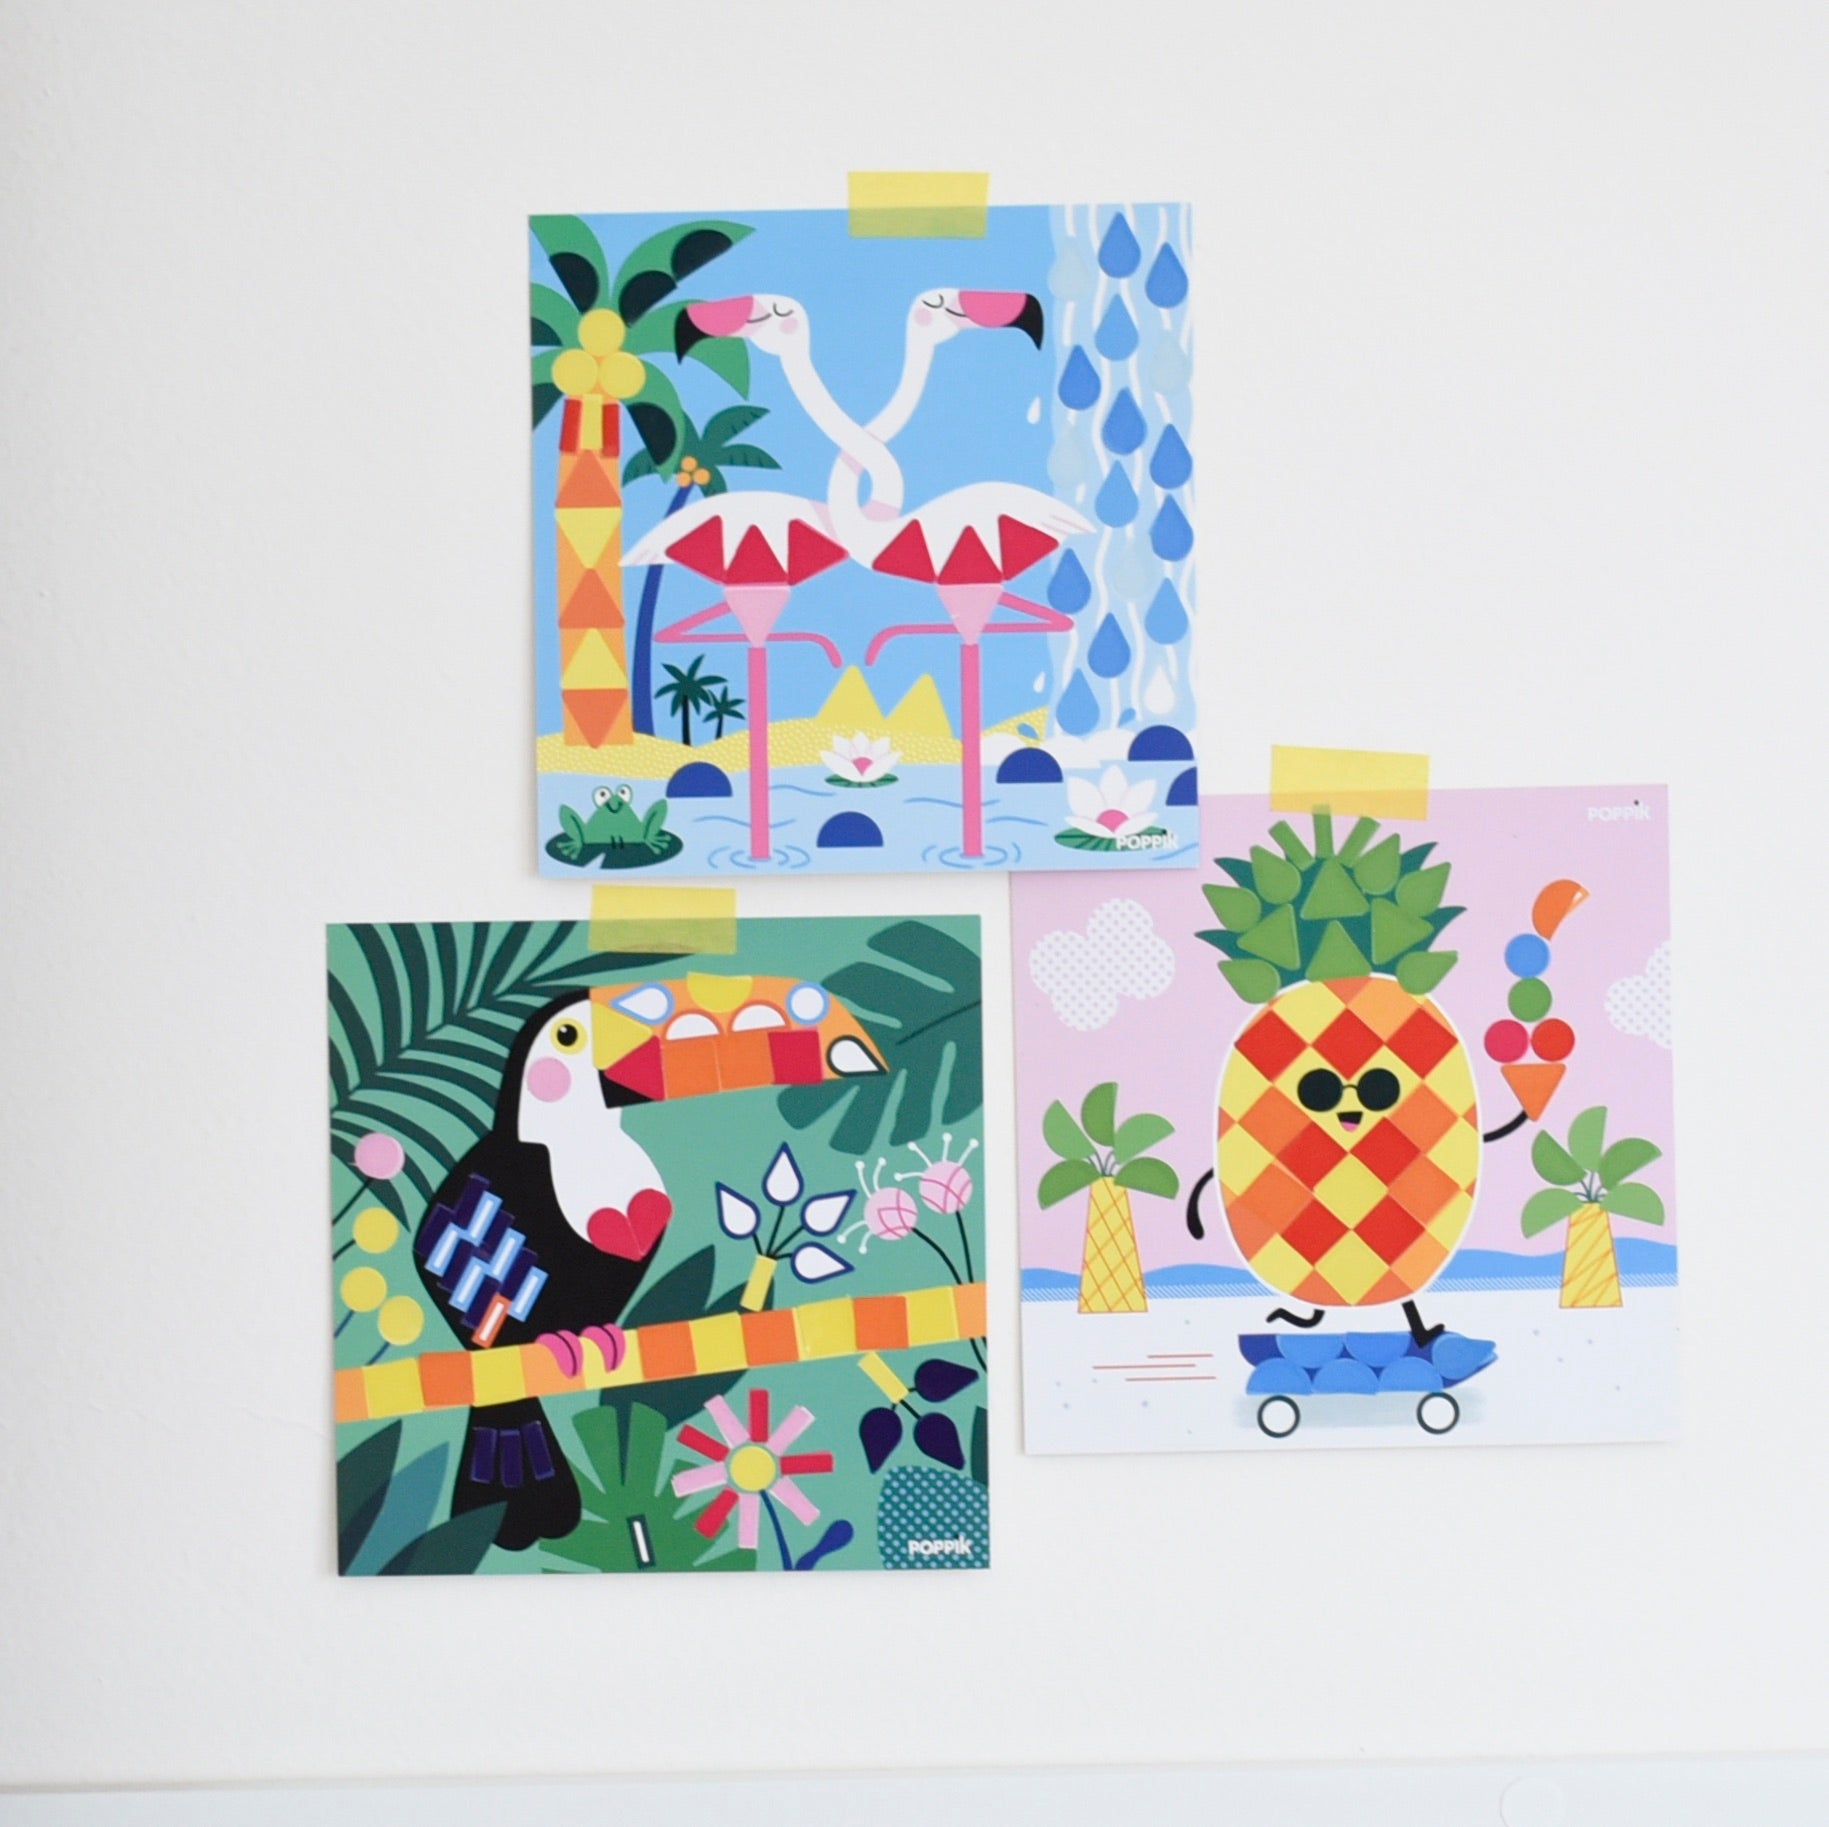 Creative sticker cards - Tropical-Little Fish Co.